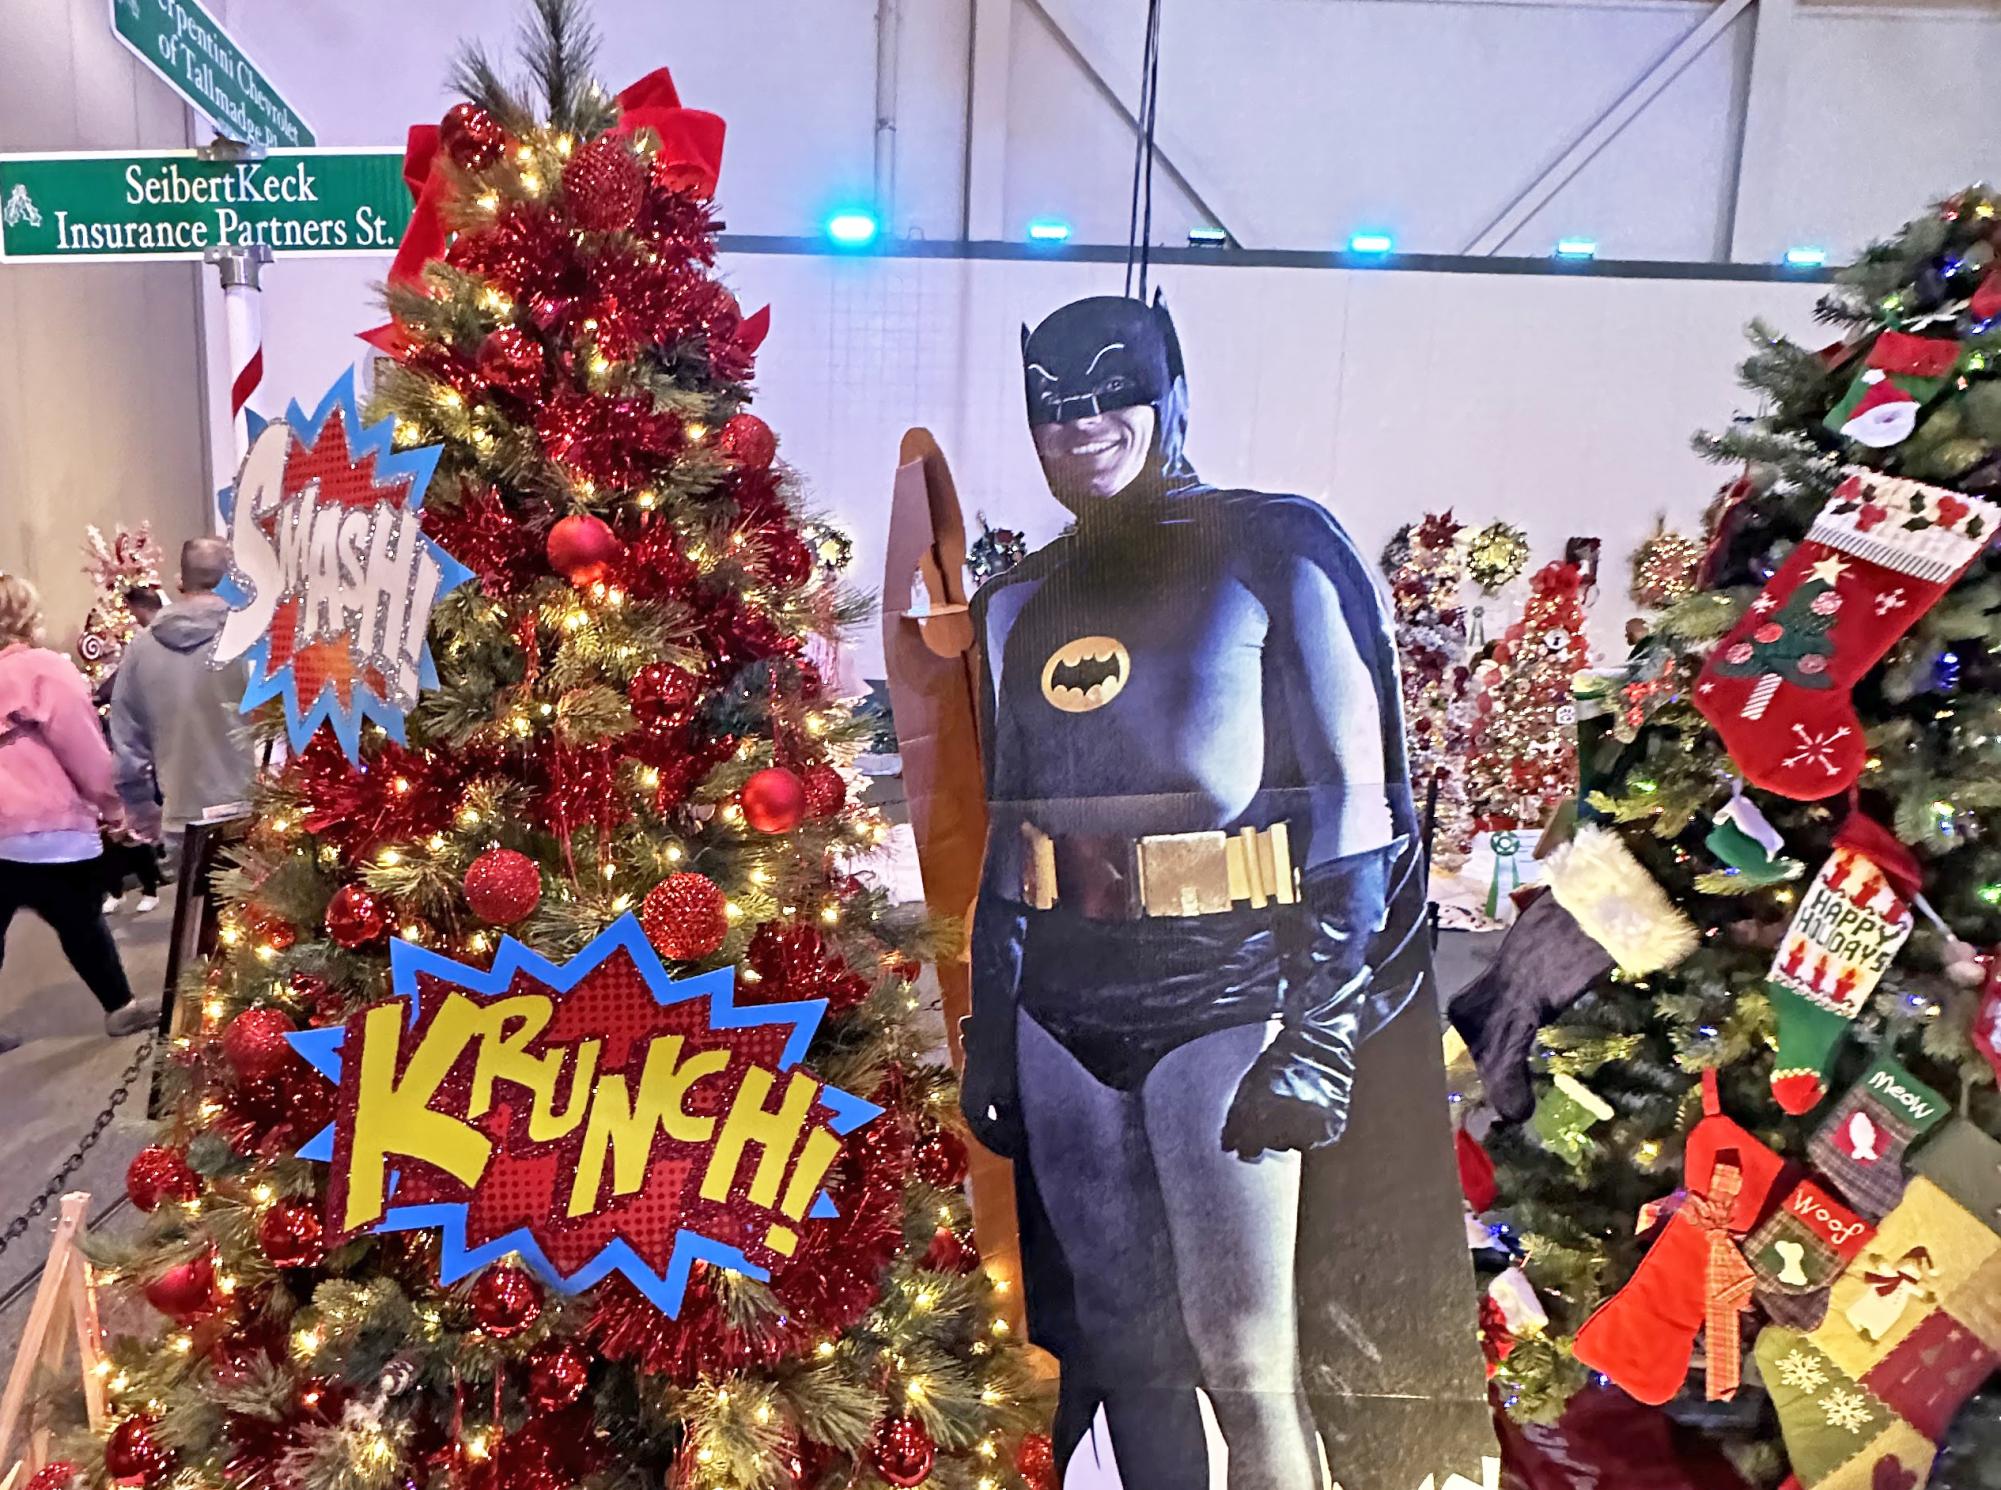 Comic book themed holiday tree from the Akron Childrens Tree Festival.